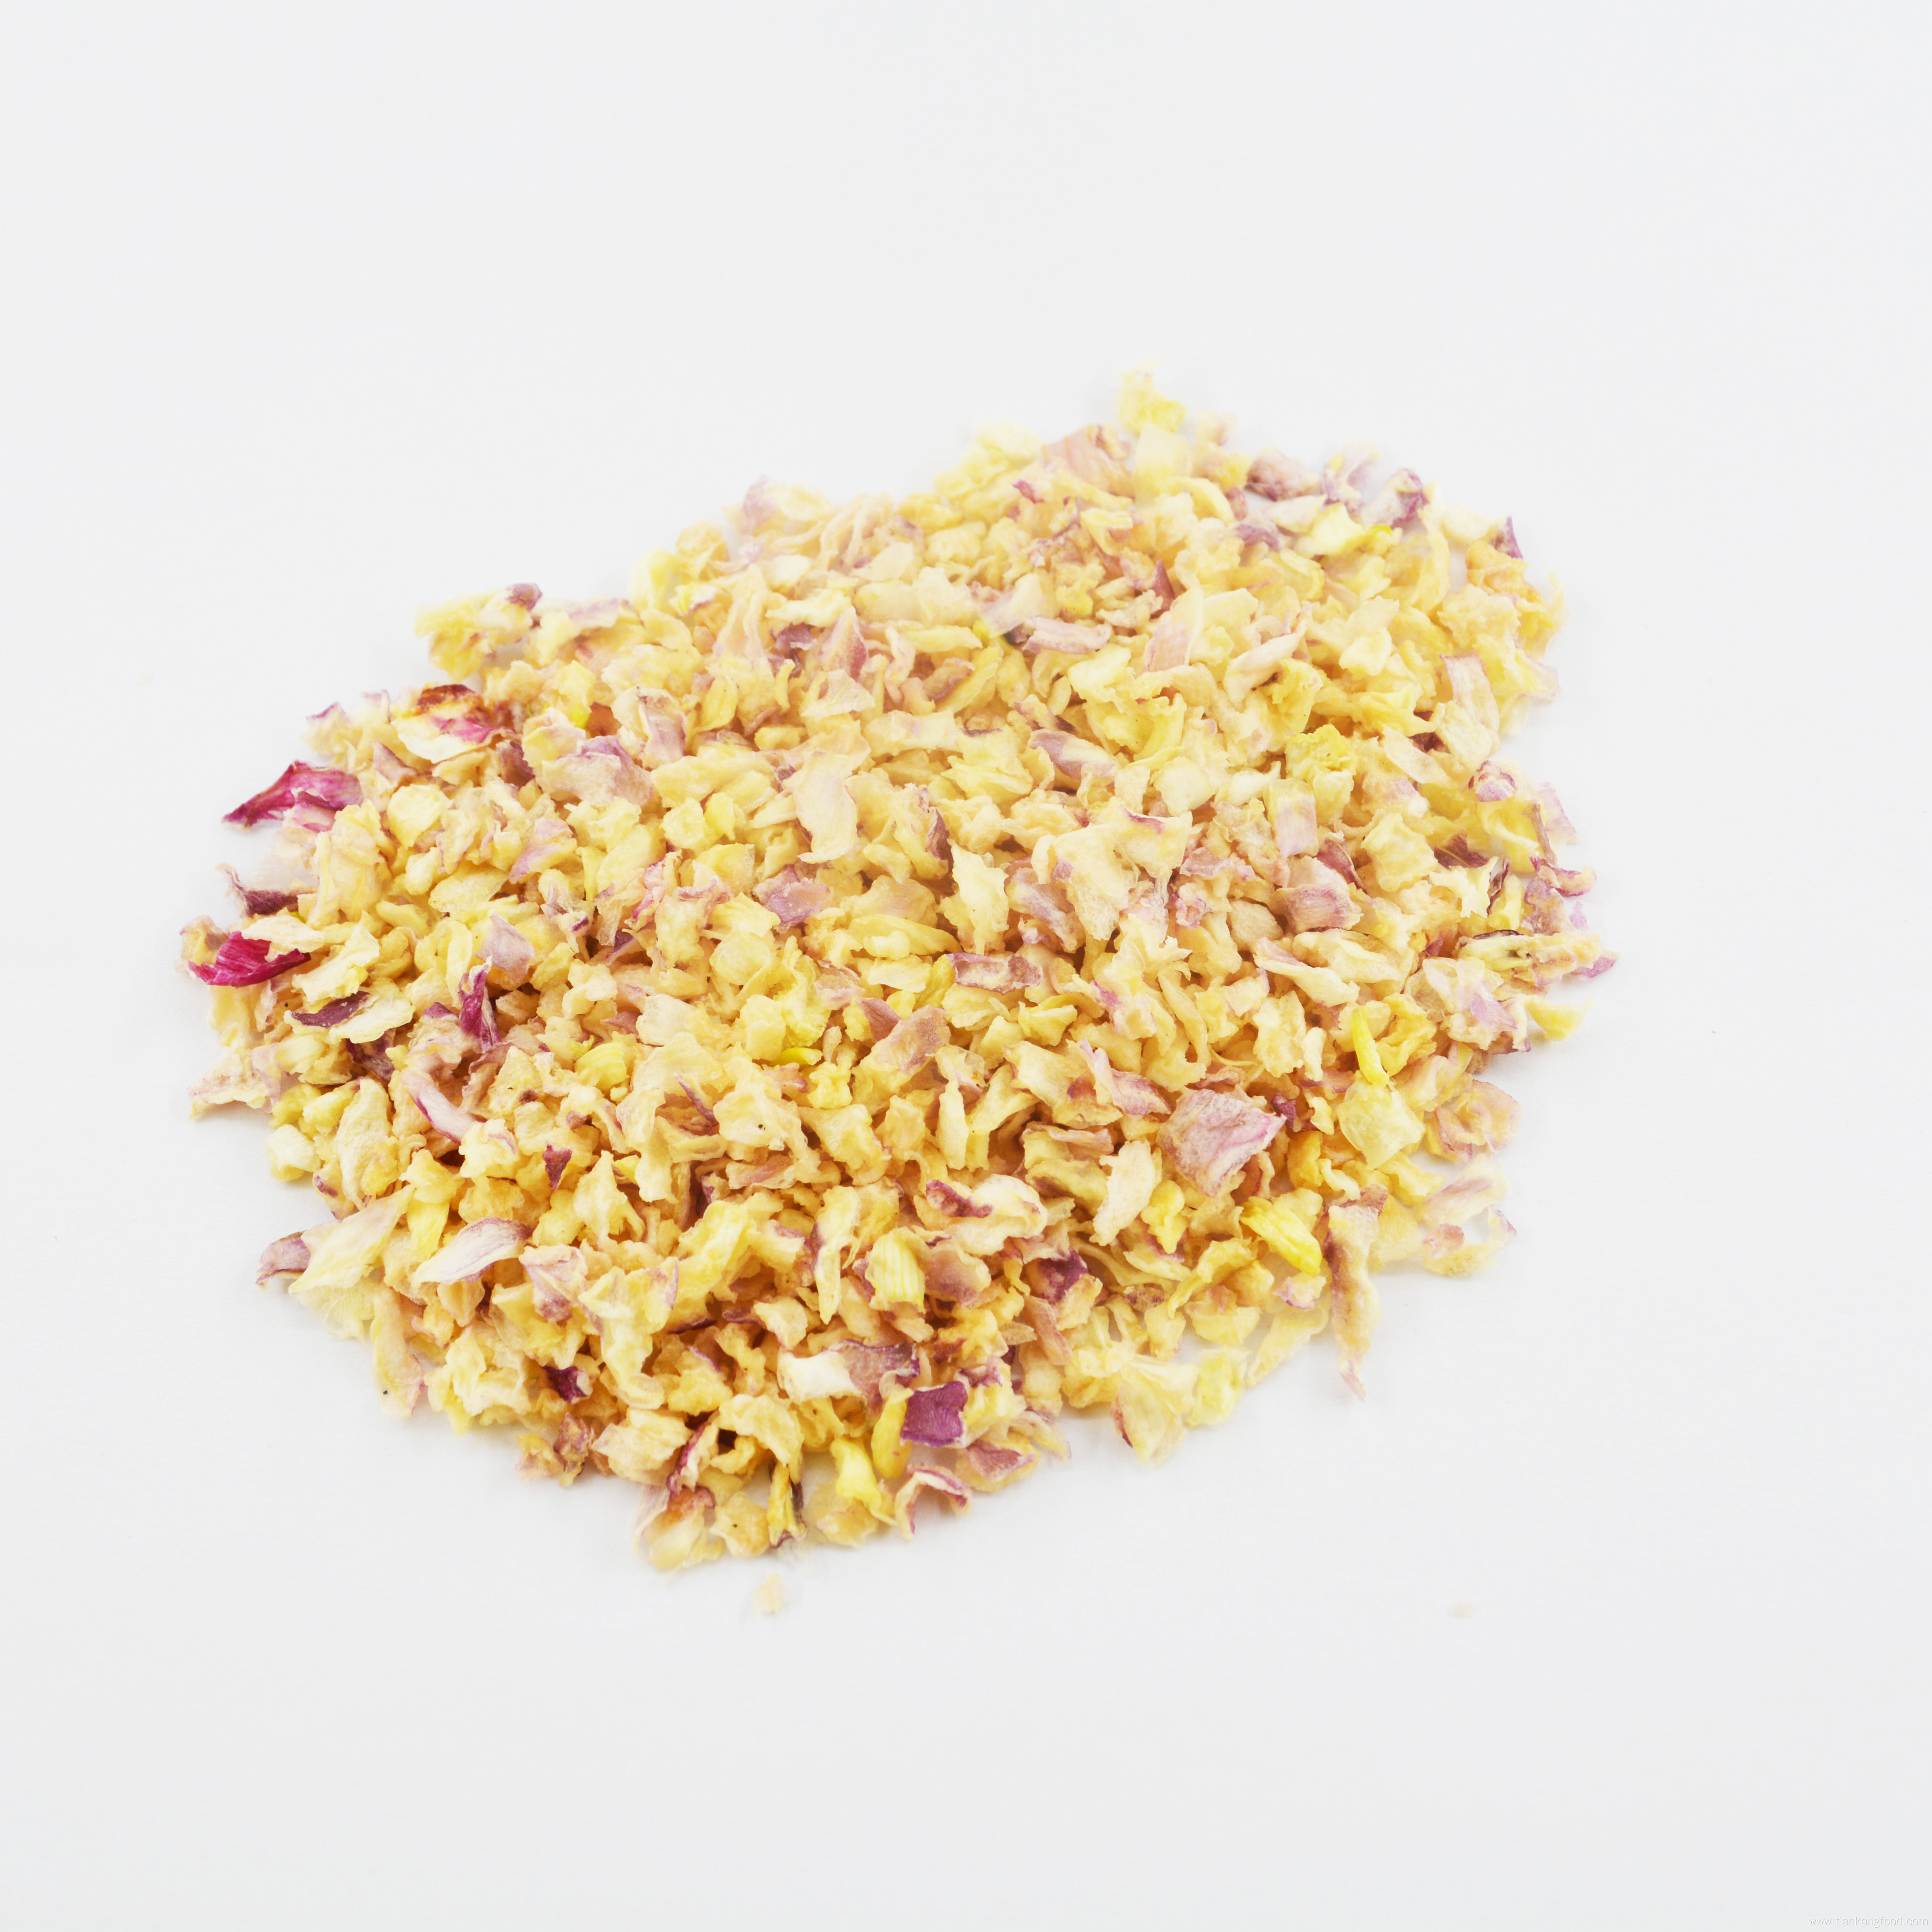 Dehydrated Red Onion Flakes 5x5mm Granules